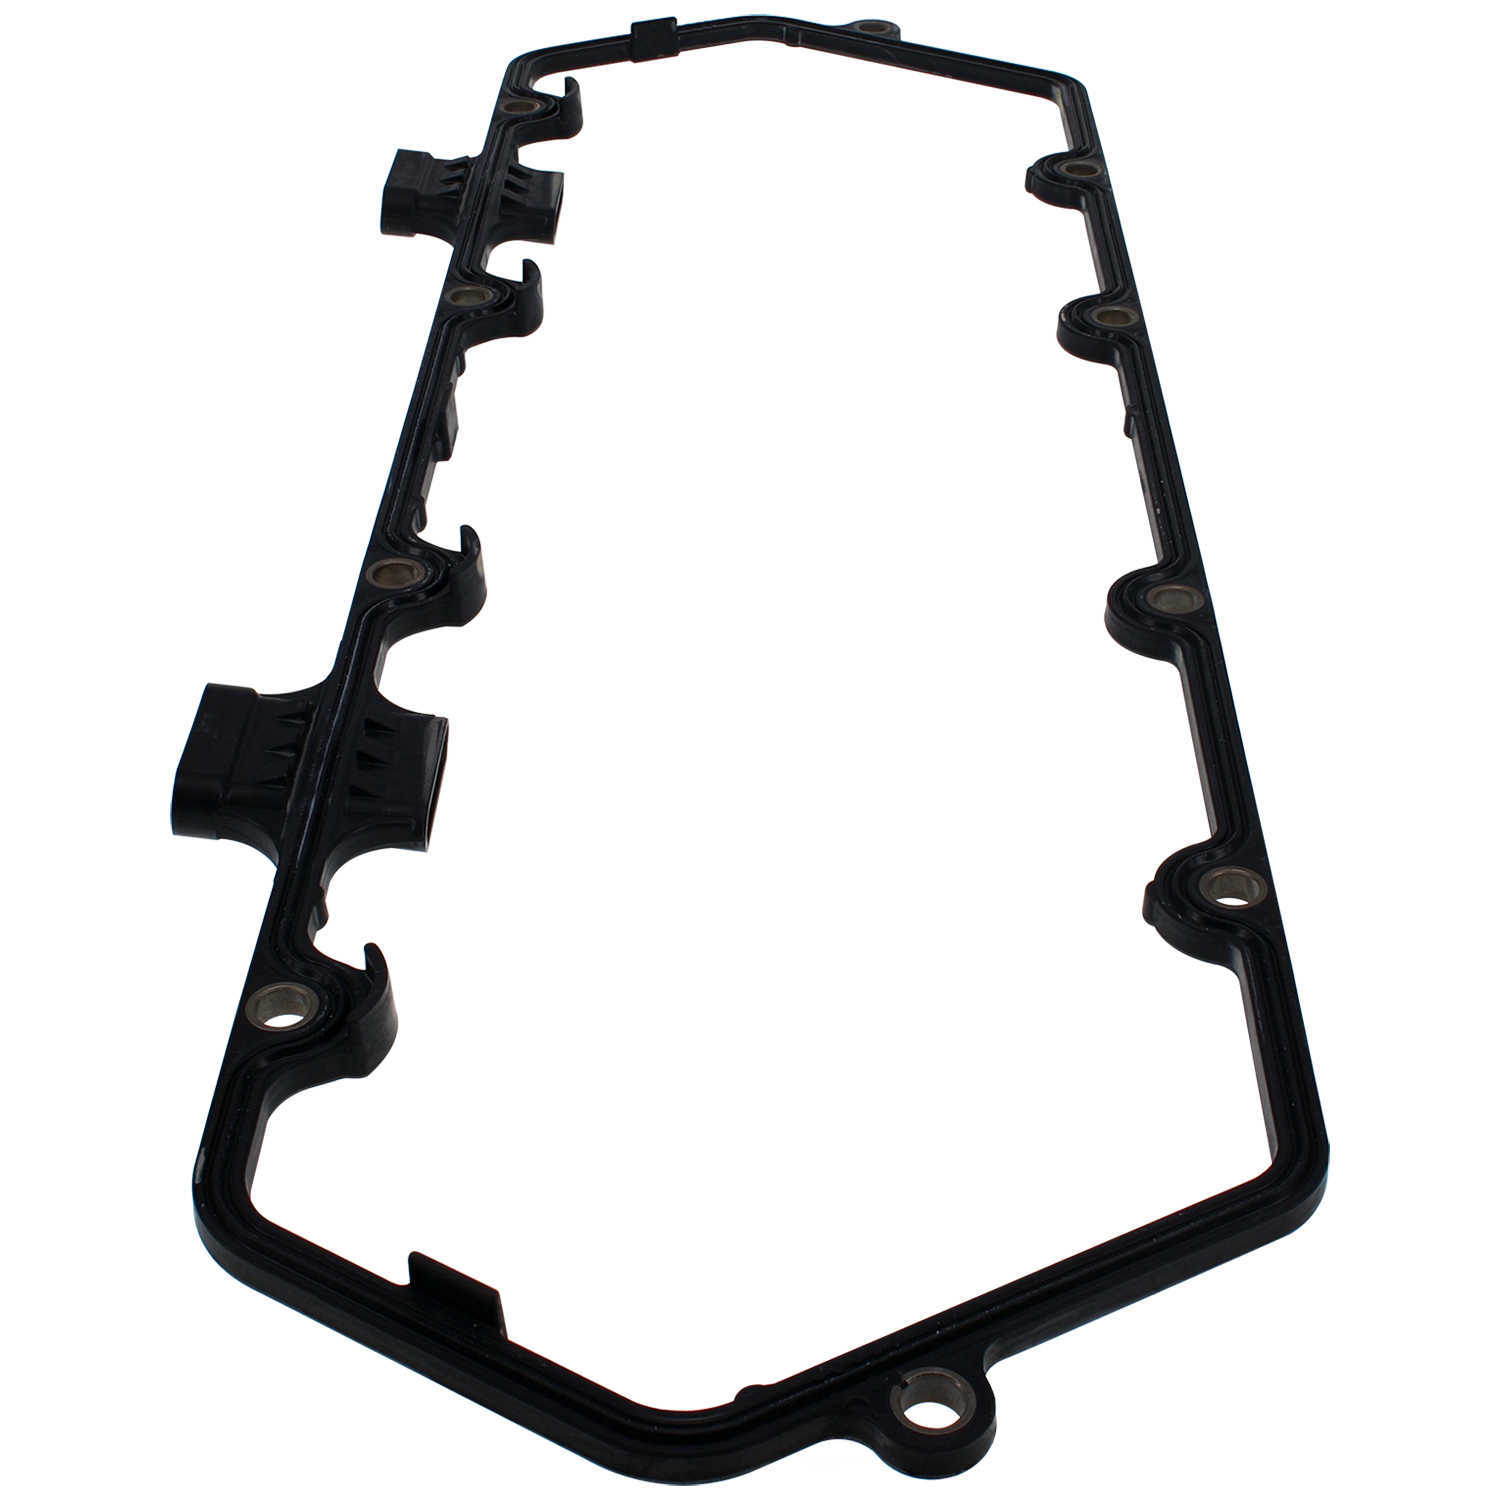 GB REMANUFACTURING INC. - Valve Cover Gasket - GBR 522-002